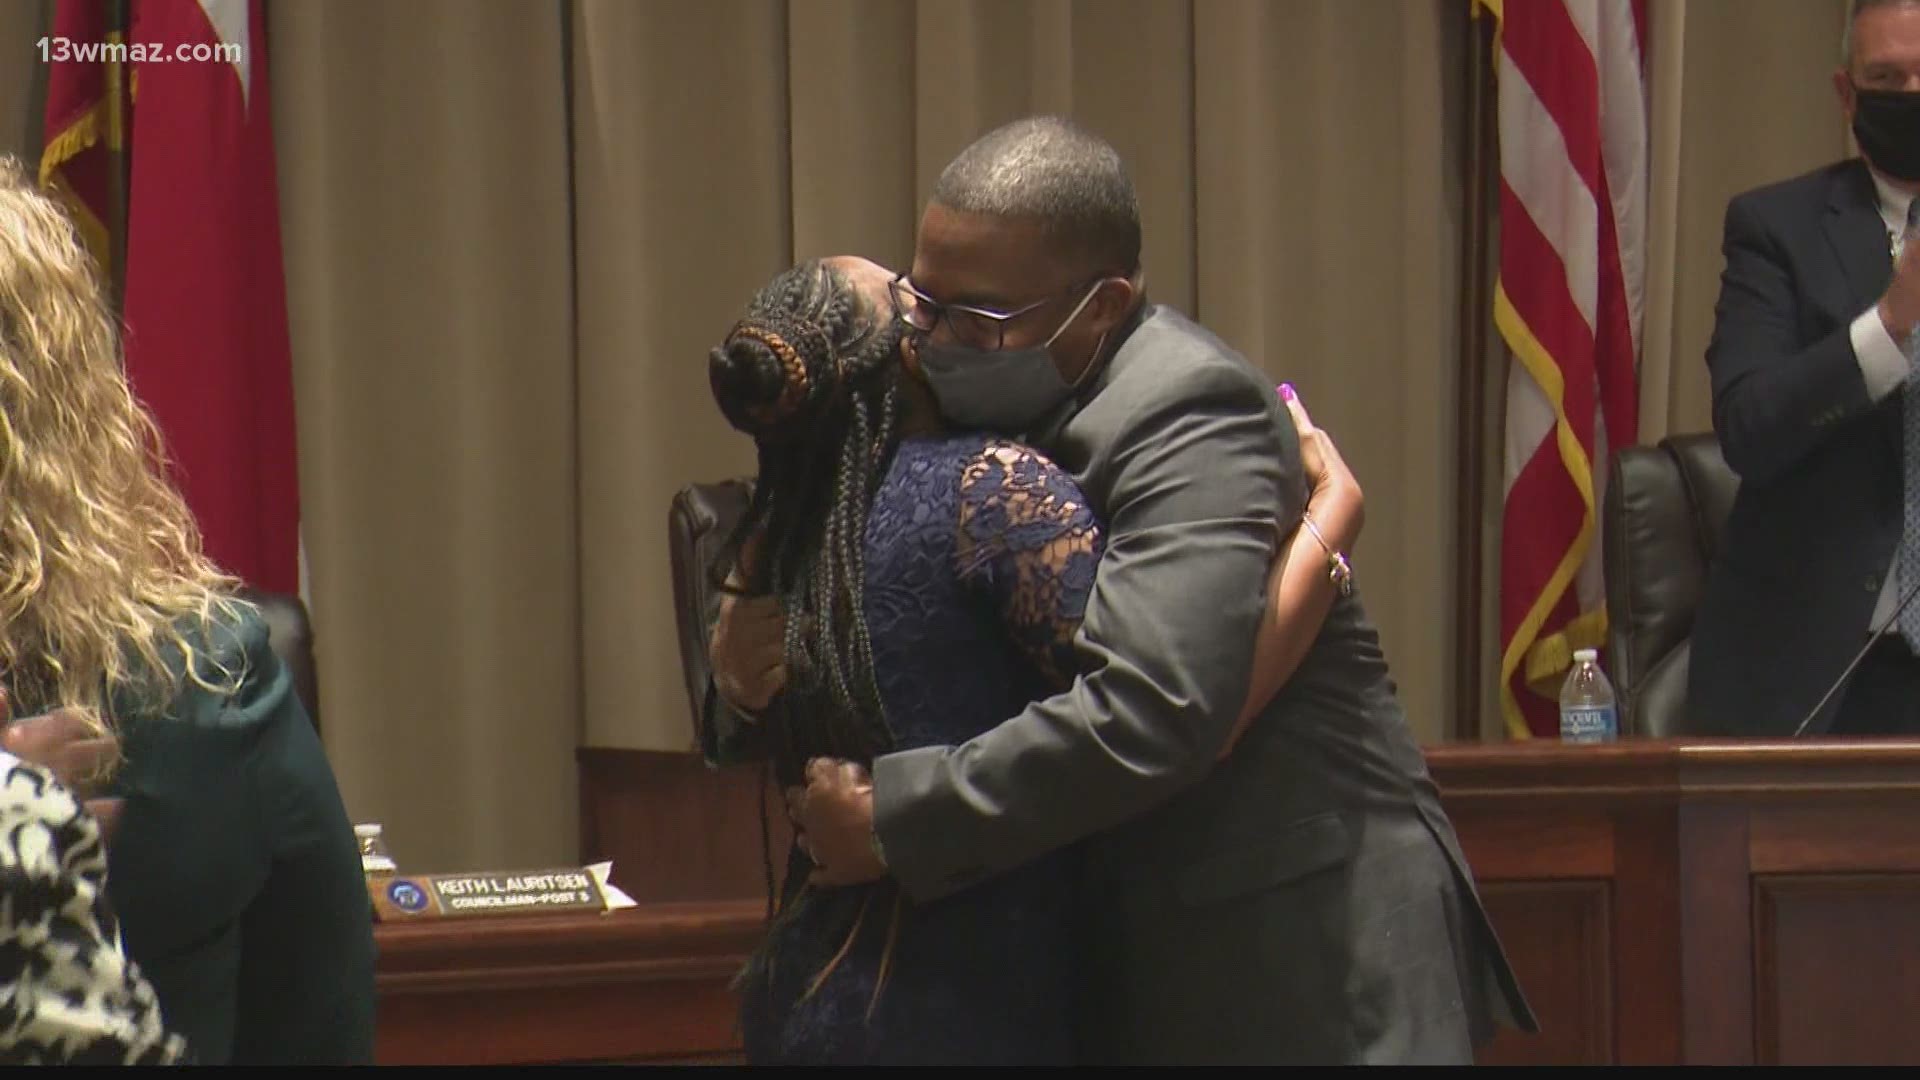 Councilman Derek Mack was elected on March 16, and on Monday, he filled the chair left vacant by Daron Lee last October.